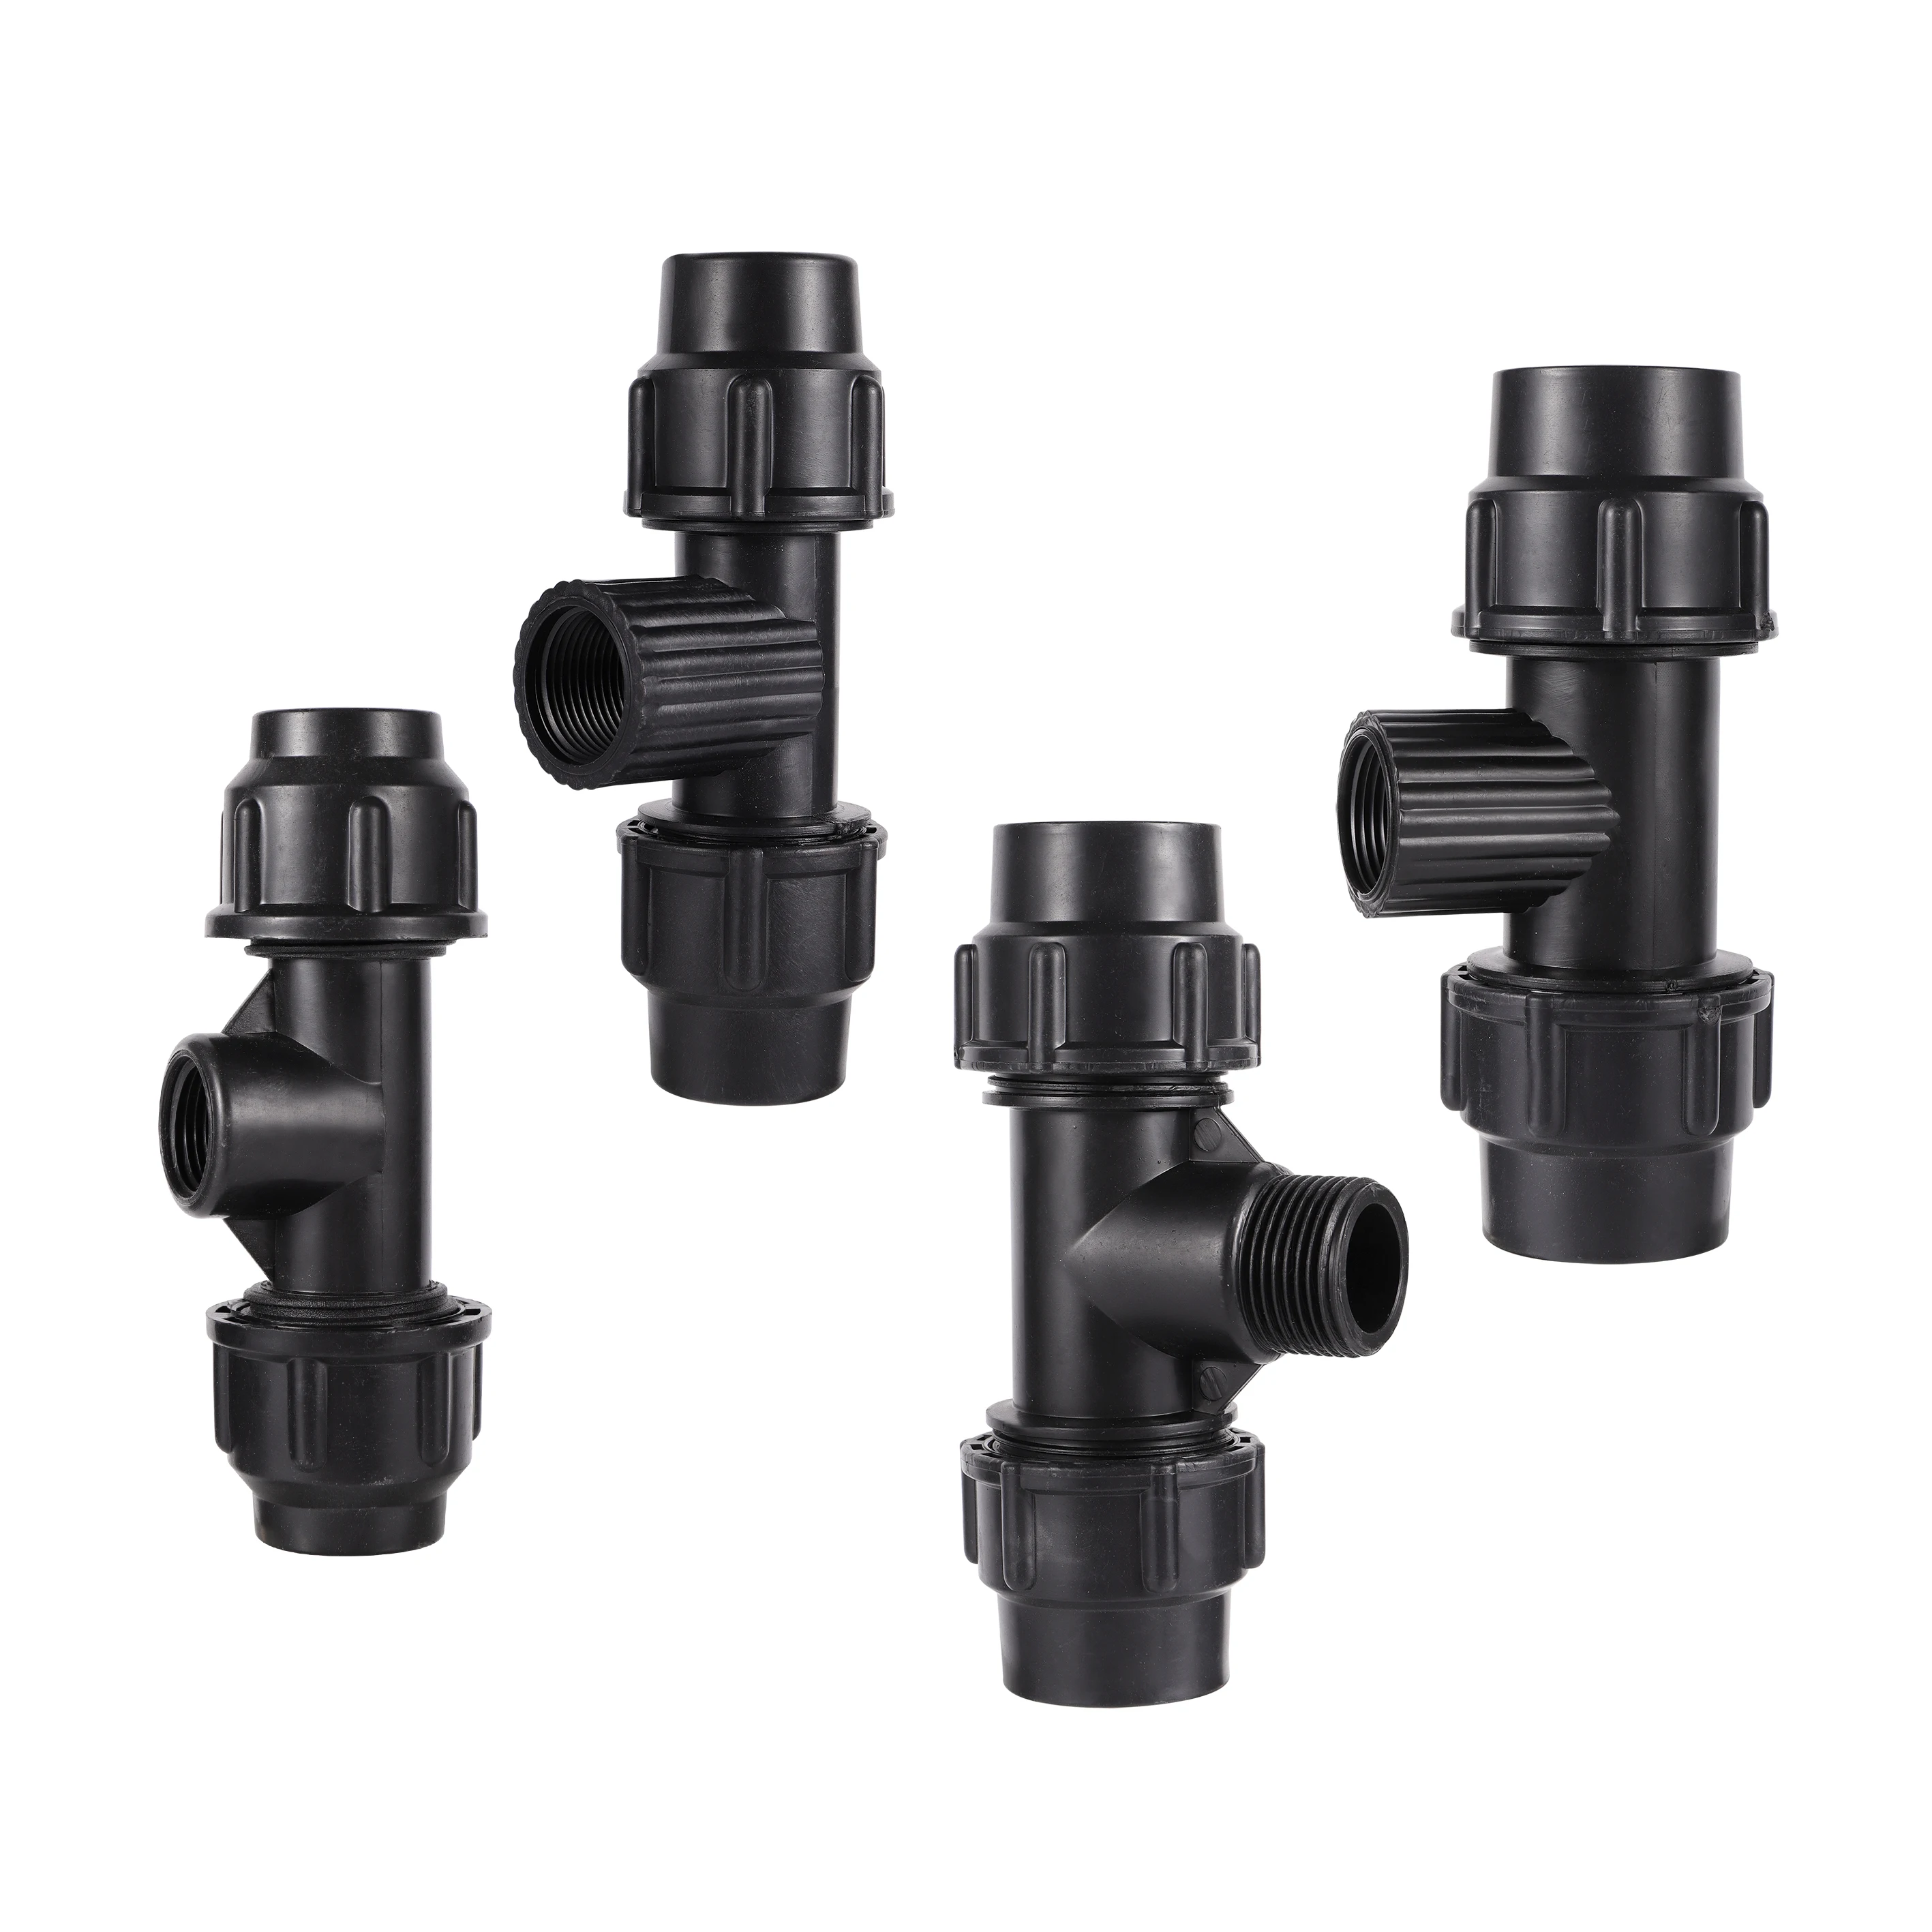 812 Pipe Lock Female Connector to 47 Pipe Variable Diameter Six-Way Adapter fits 13mm ID/ 4mm ID Kalolary 10PCS Barbed Tee 1/2 inch to 1/4 inch Irrigation Tube Anti-Drop Premiun Quality Fitting 